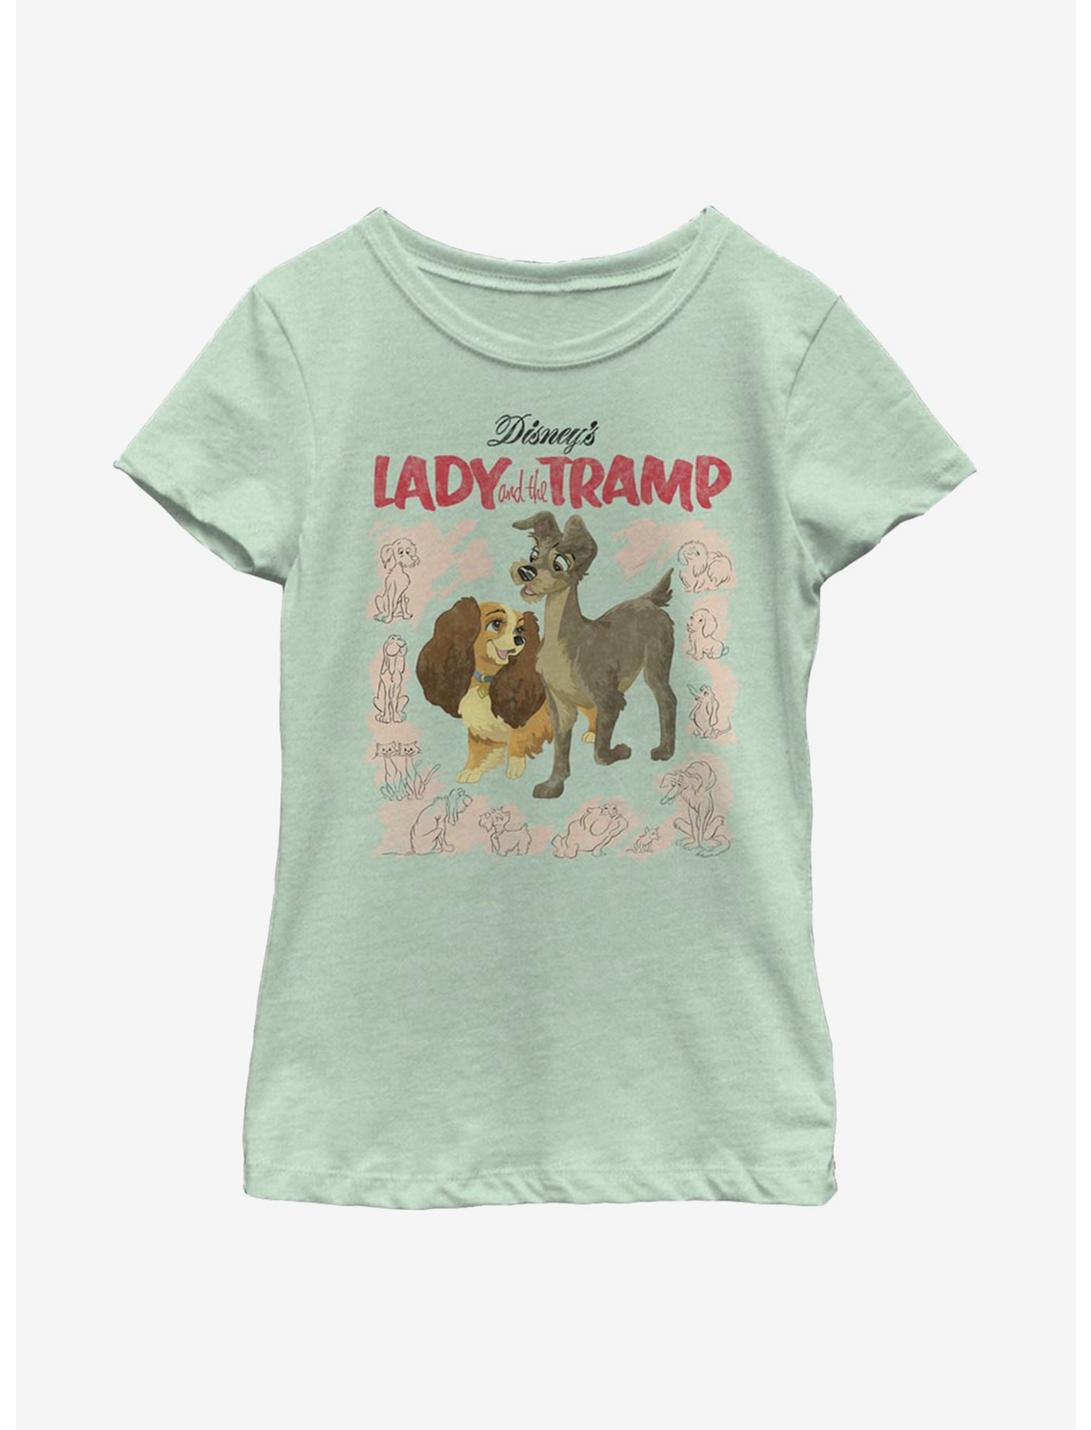 Disney Lady And The Tramp Vintage Cover Youth Girls T-Shirt, MINT, hi-res